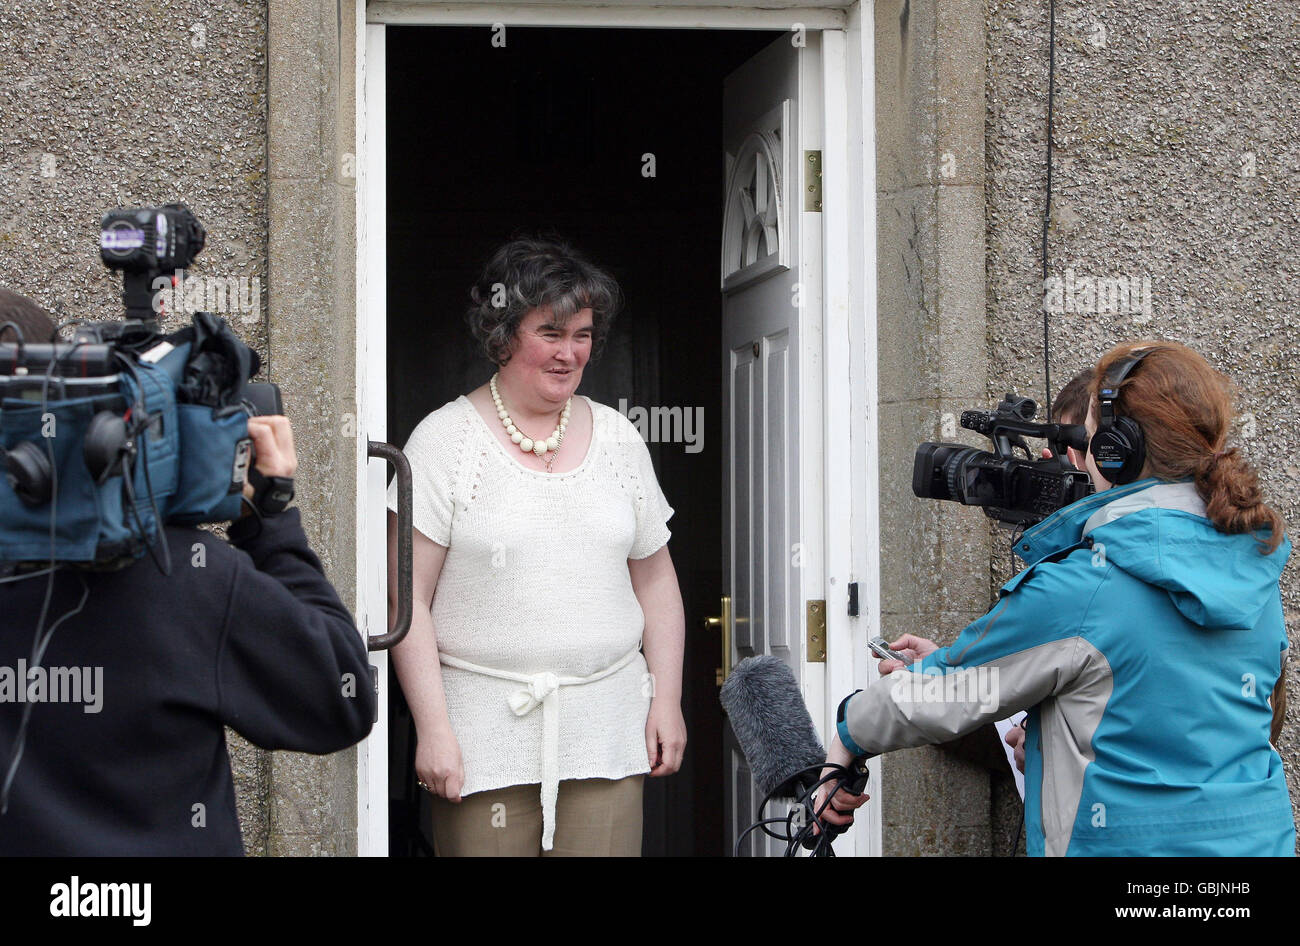 Britain's Got Talent star Susan Boyle greets the media at her front door in Blackburn,West Lothian. Stock Photo